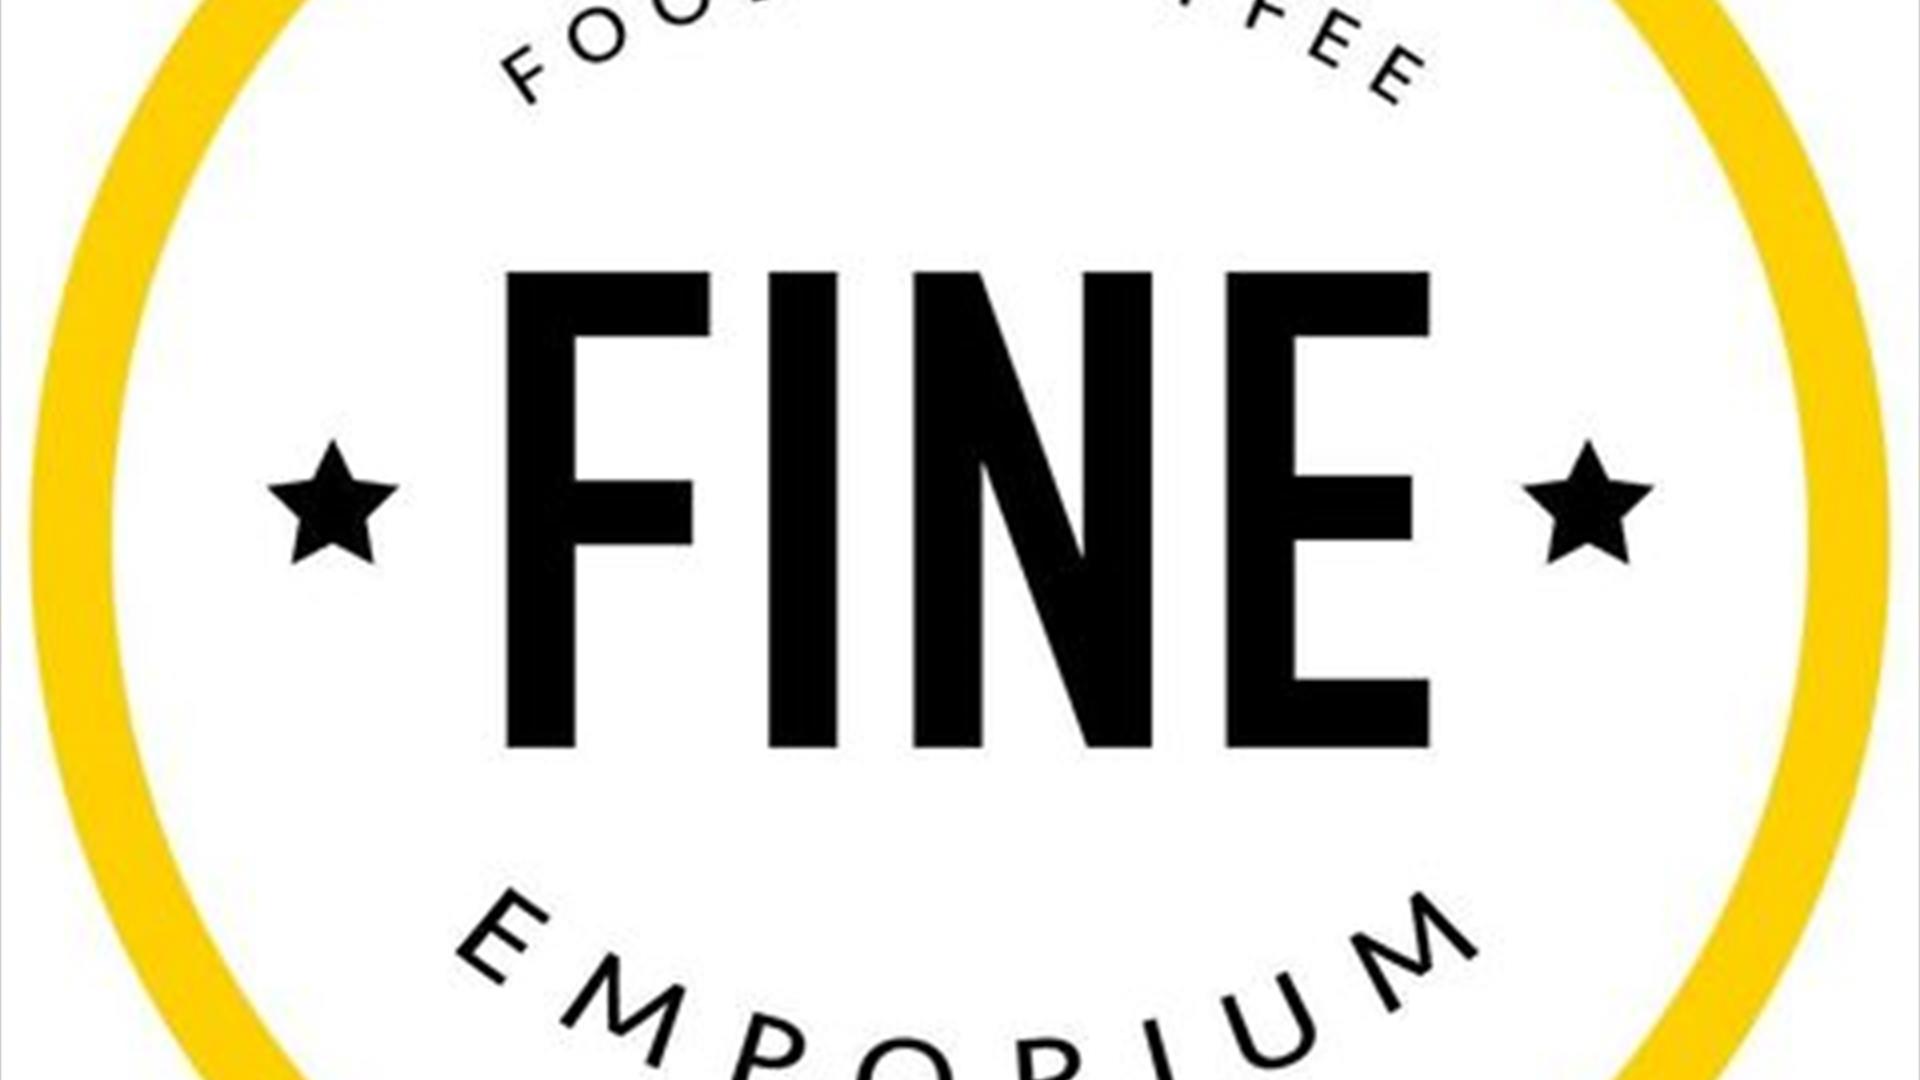 Image is of log for Fine coffee